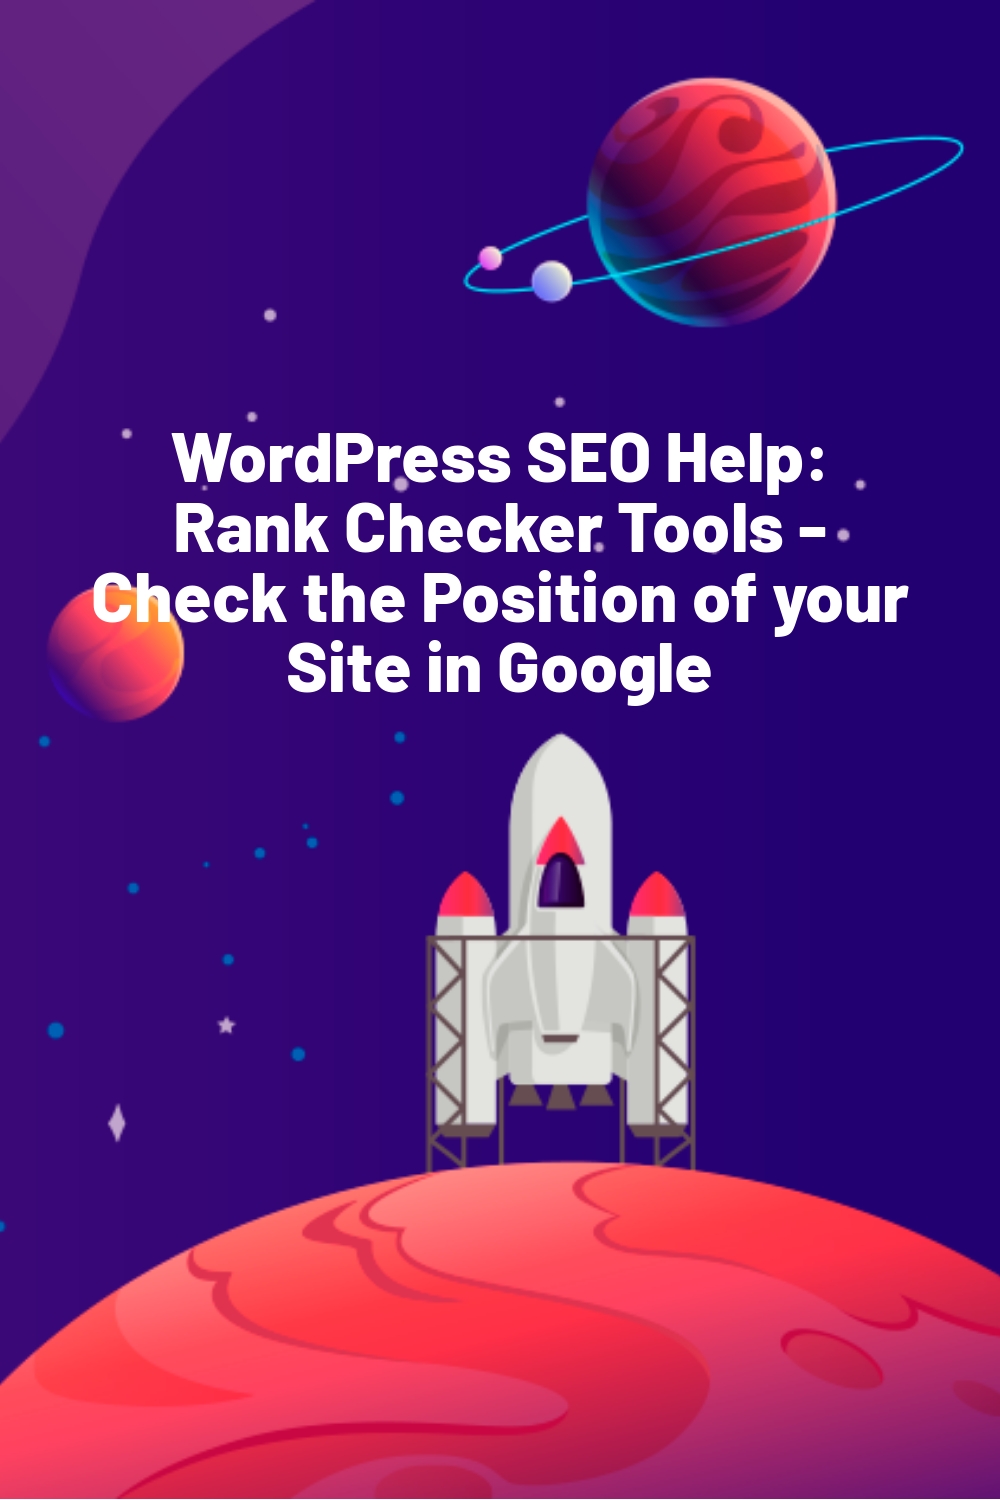 WordPress SEO Help: Rank Checker Tools – Check the Position of your Site in Google